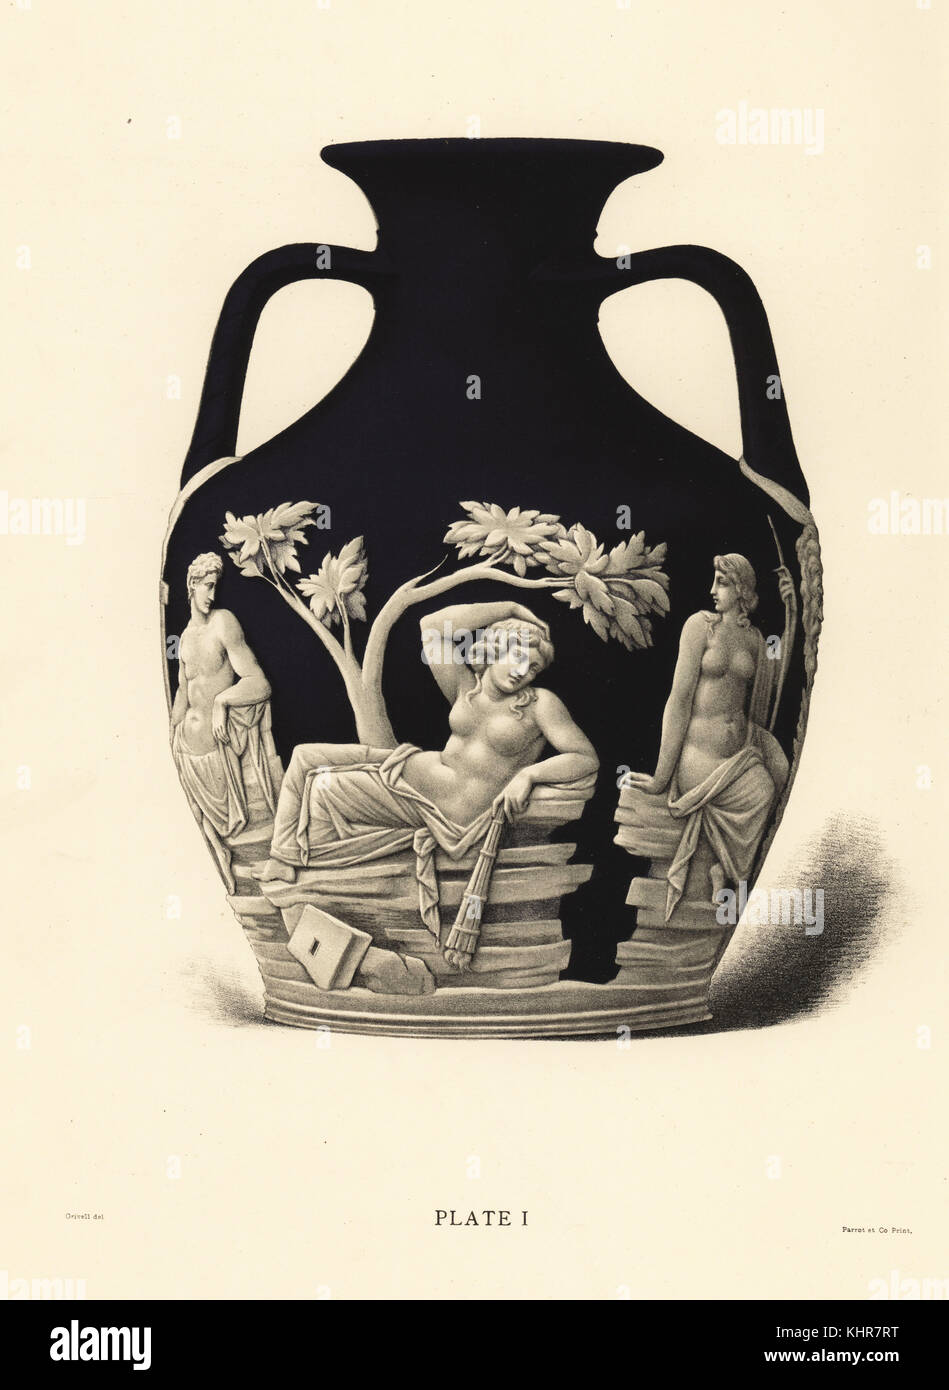 The Portland Vase or Barberini Vase. Chromolithograph drawn by Grivell and lithographed by Parrot et Co. from Frederick Rathbone's Old Wedgwood, the Decorative or Artistic Ceramic Work Produced by Josiah Wedgwood, Quaritch, London, 1898. Stock Photo